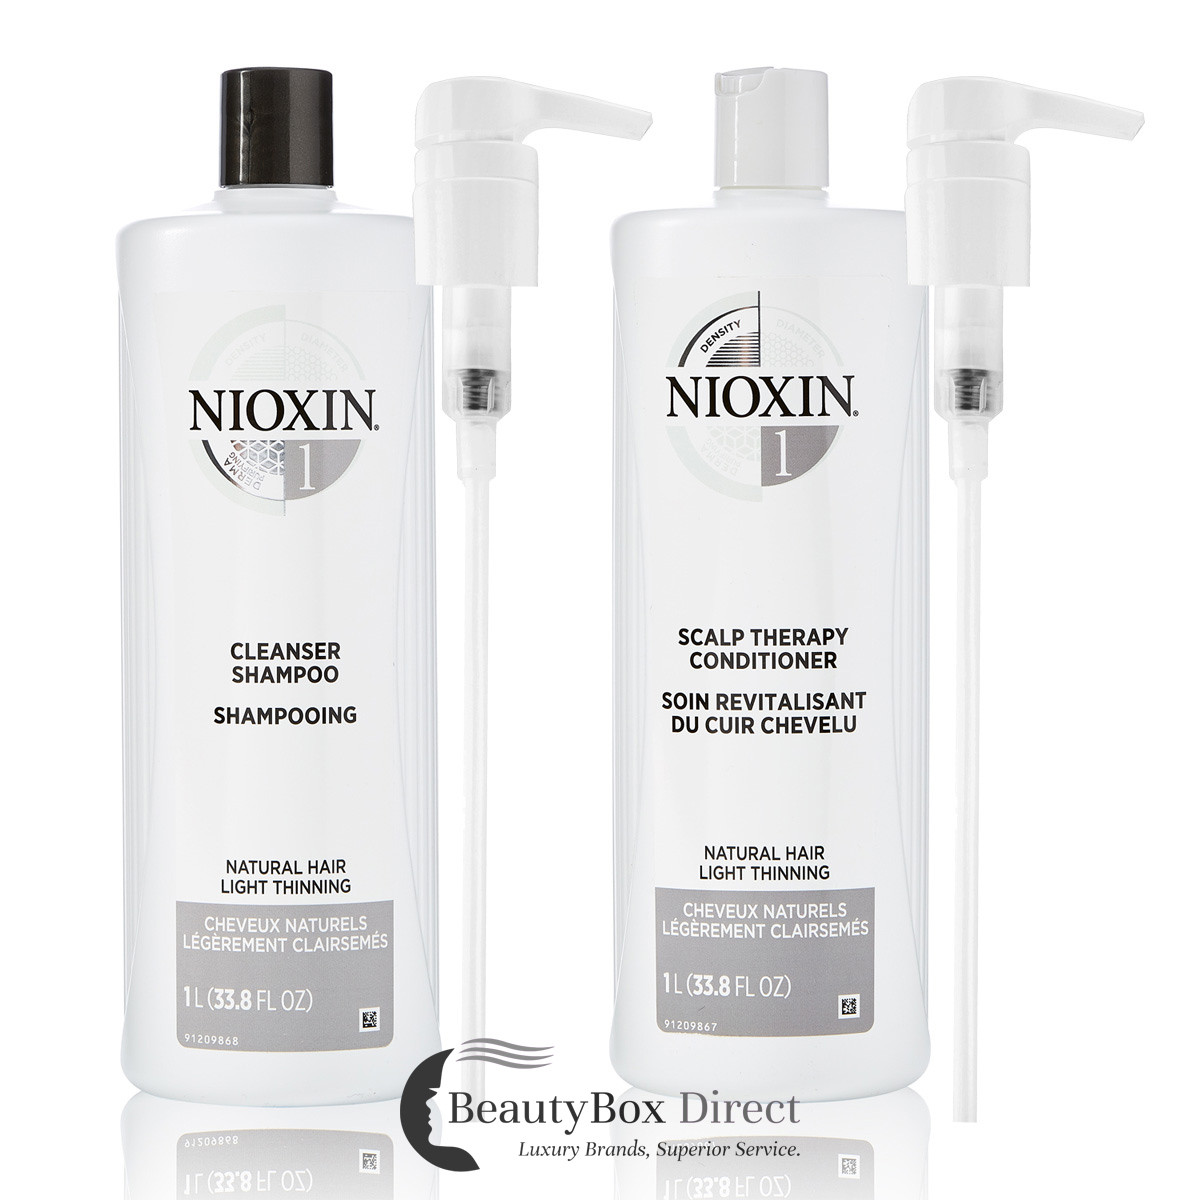 Kritisk Anholdelse Udløbet Nioxin System 1 Cleanser Shampoo & Scalp Therapy Conditioner 33.8 oz -  BeautyBox Direct